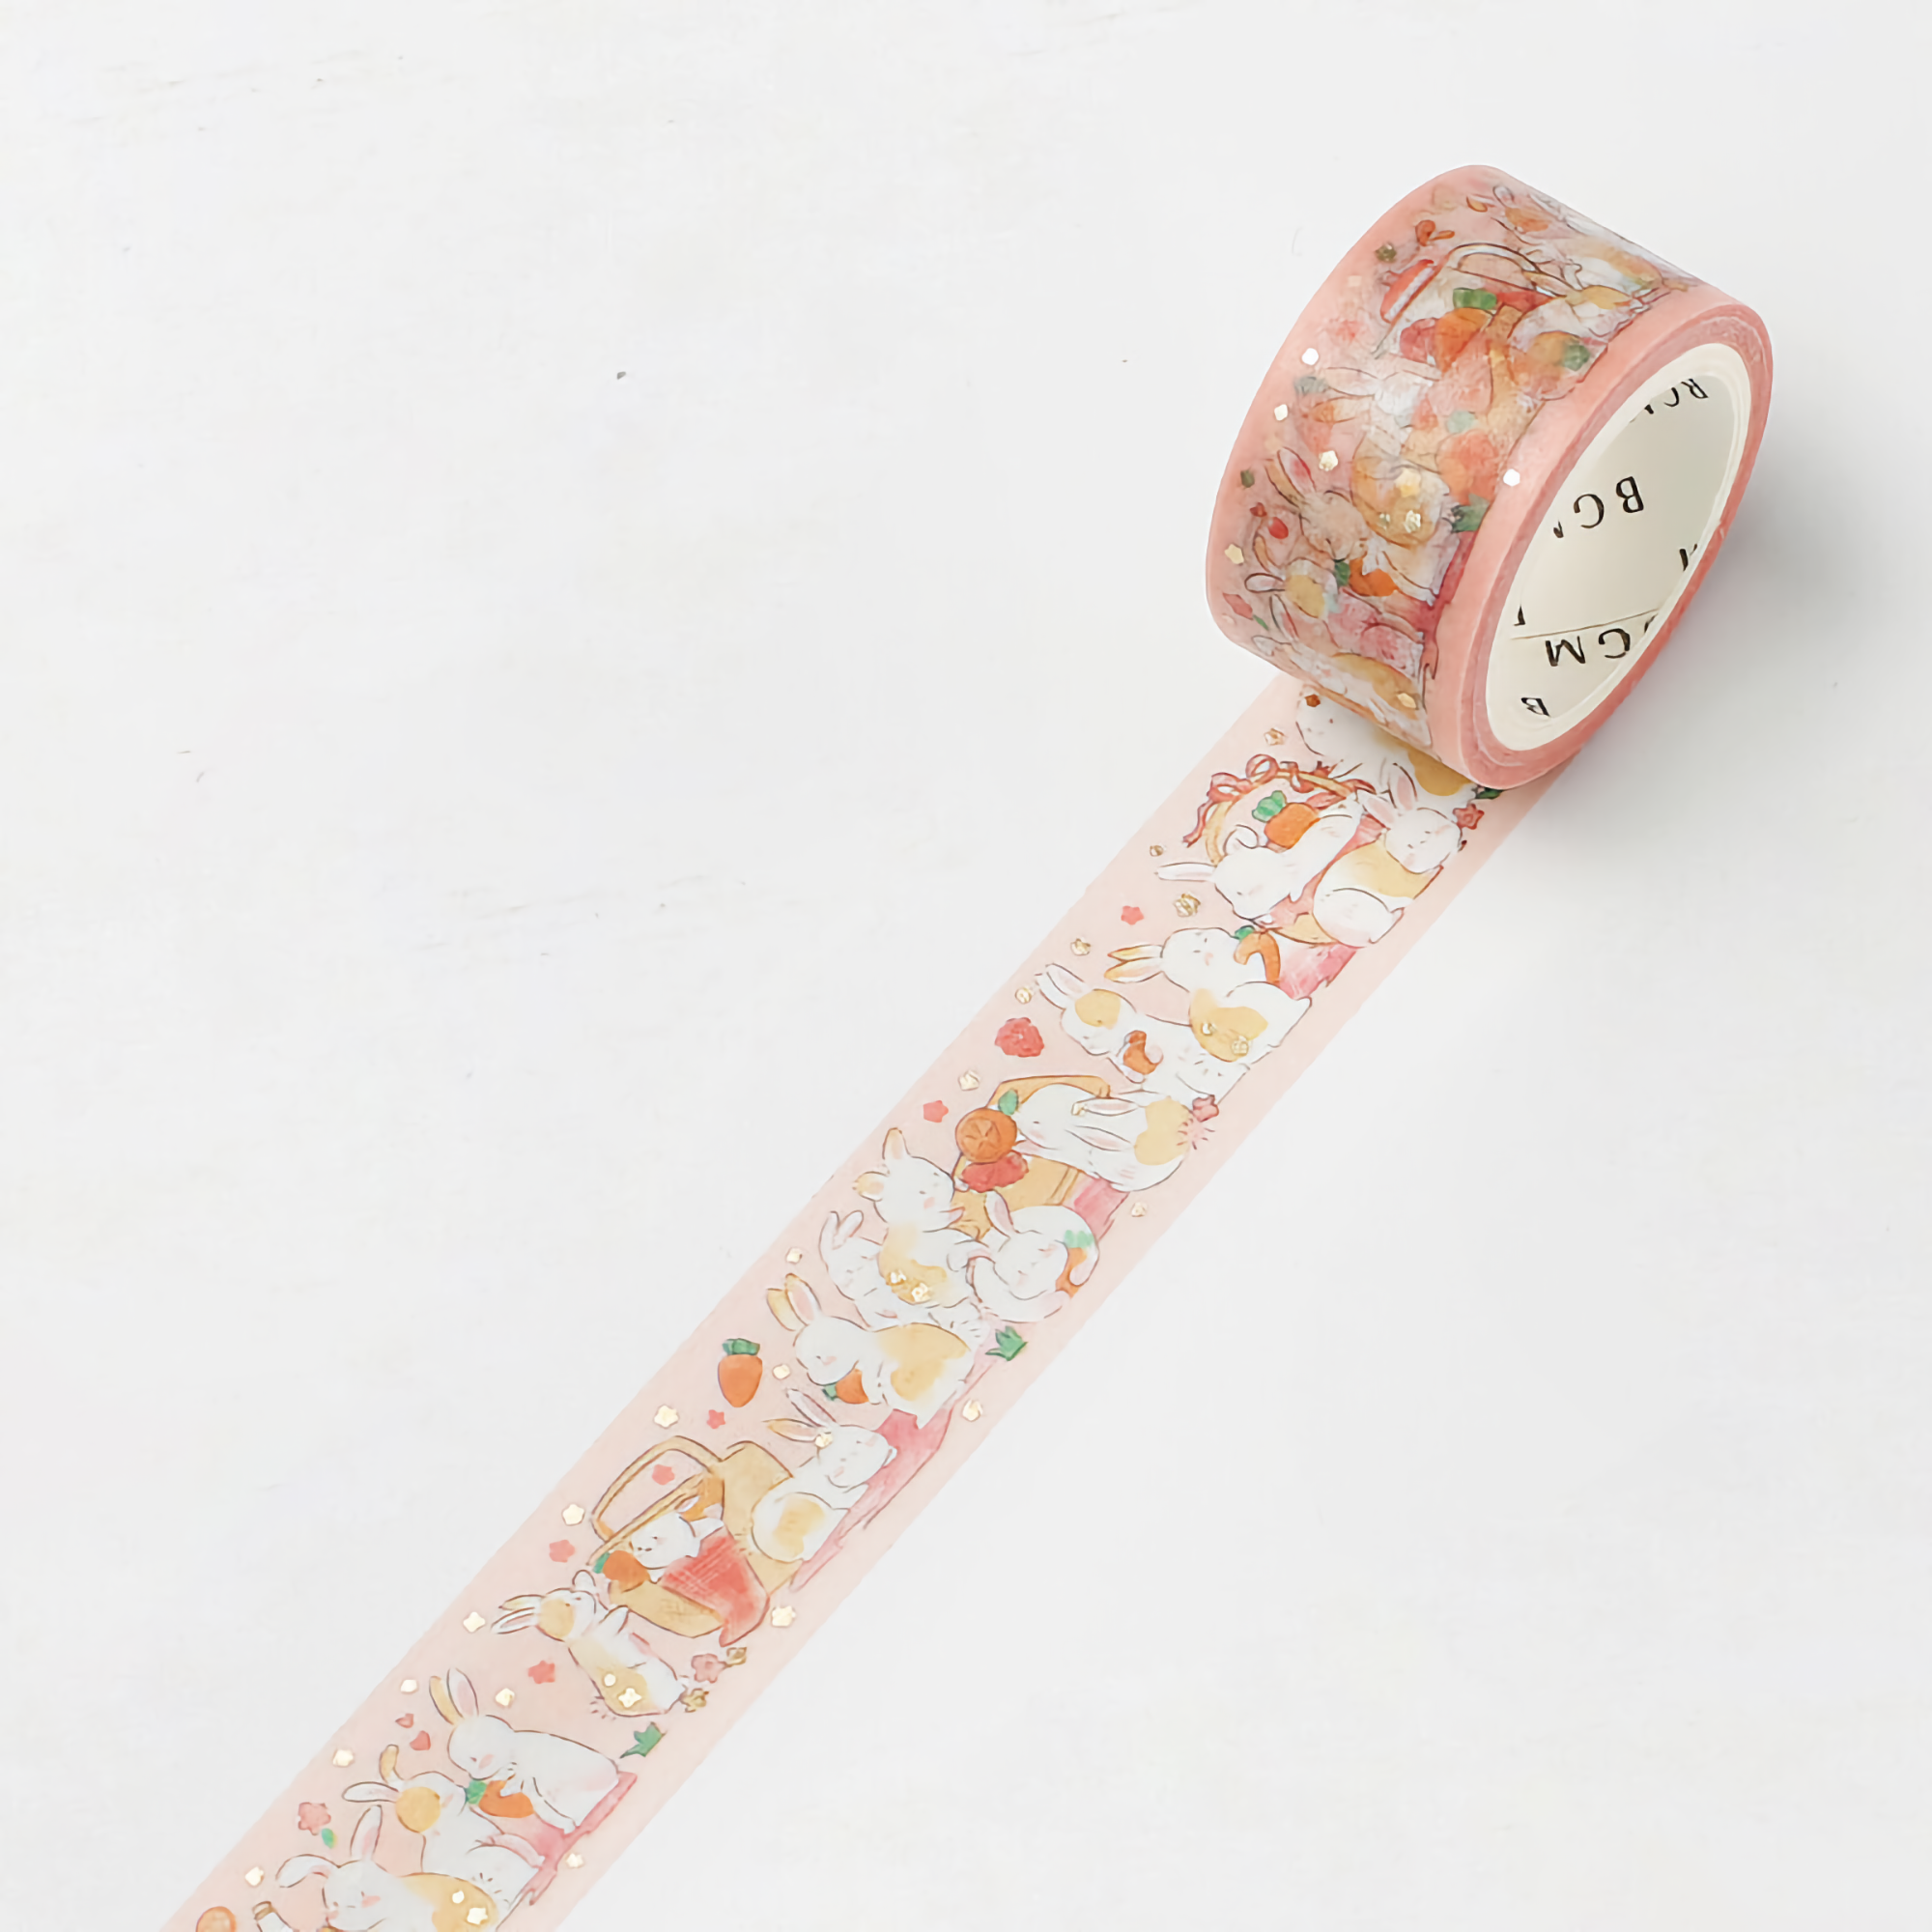 BGM Washi Tape Special Foil Animal Party Picnic 20 mm